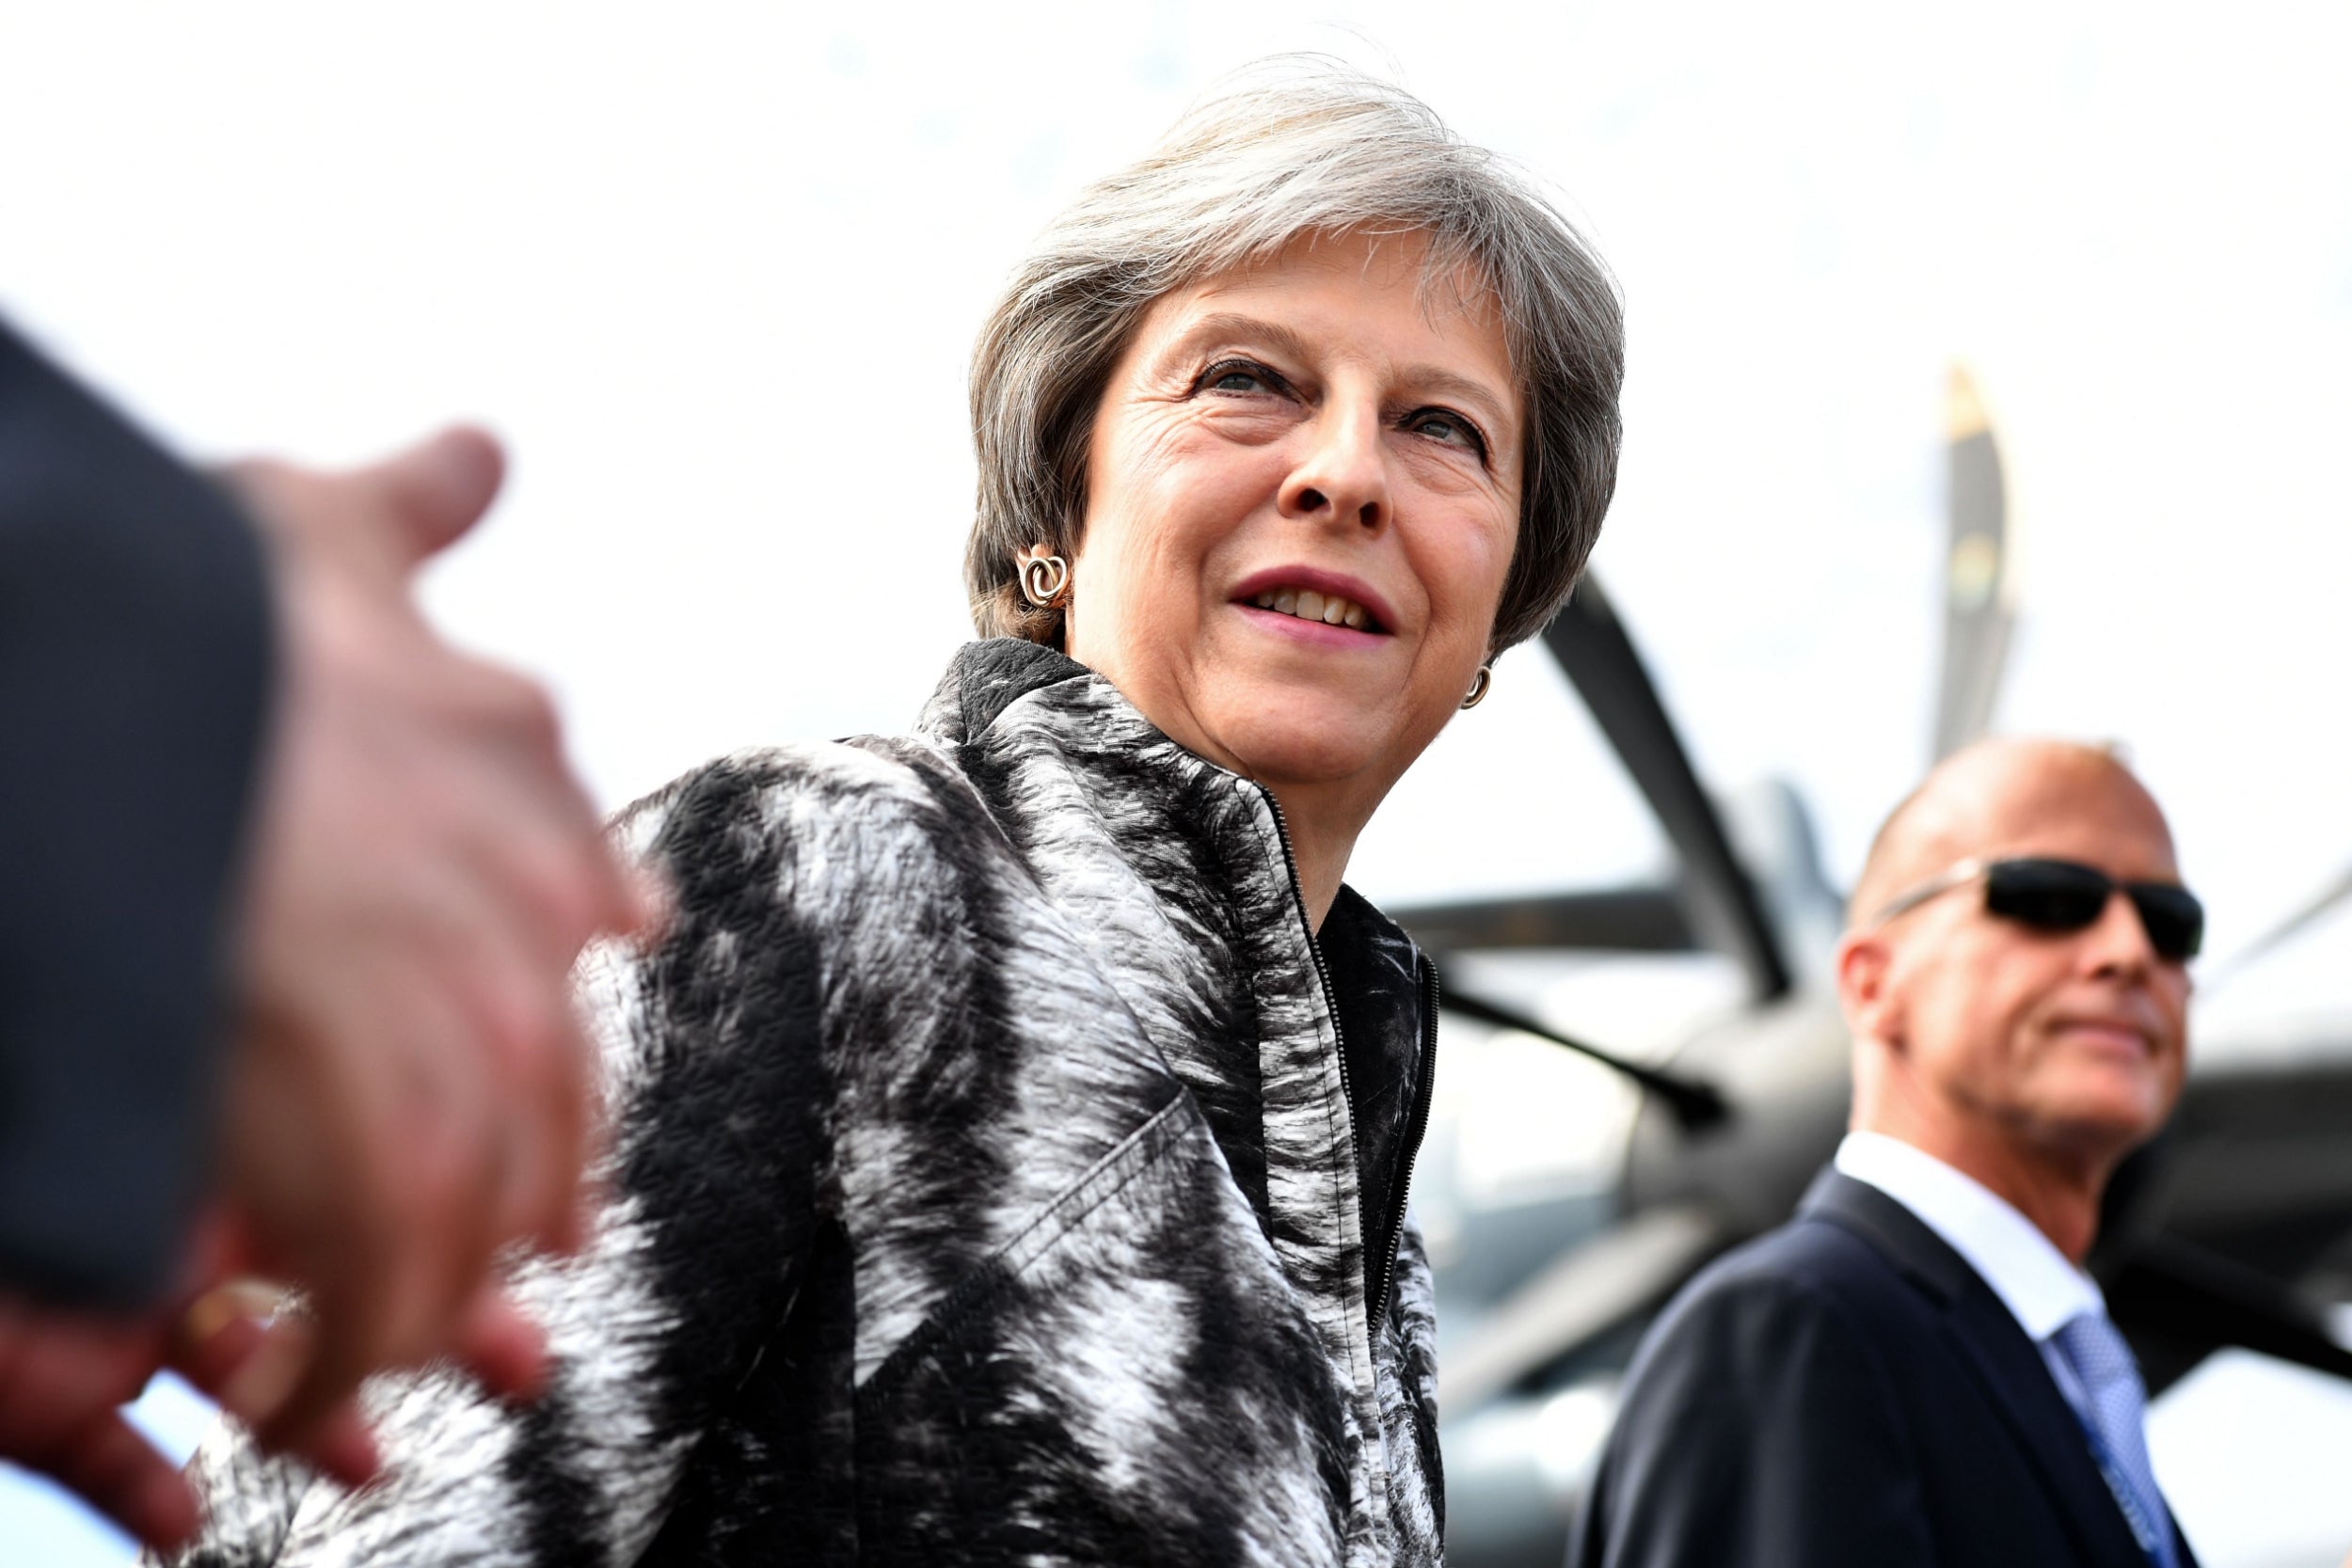 Prime Minister Theresa May will go to the Irish border this week